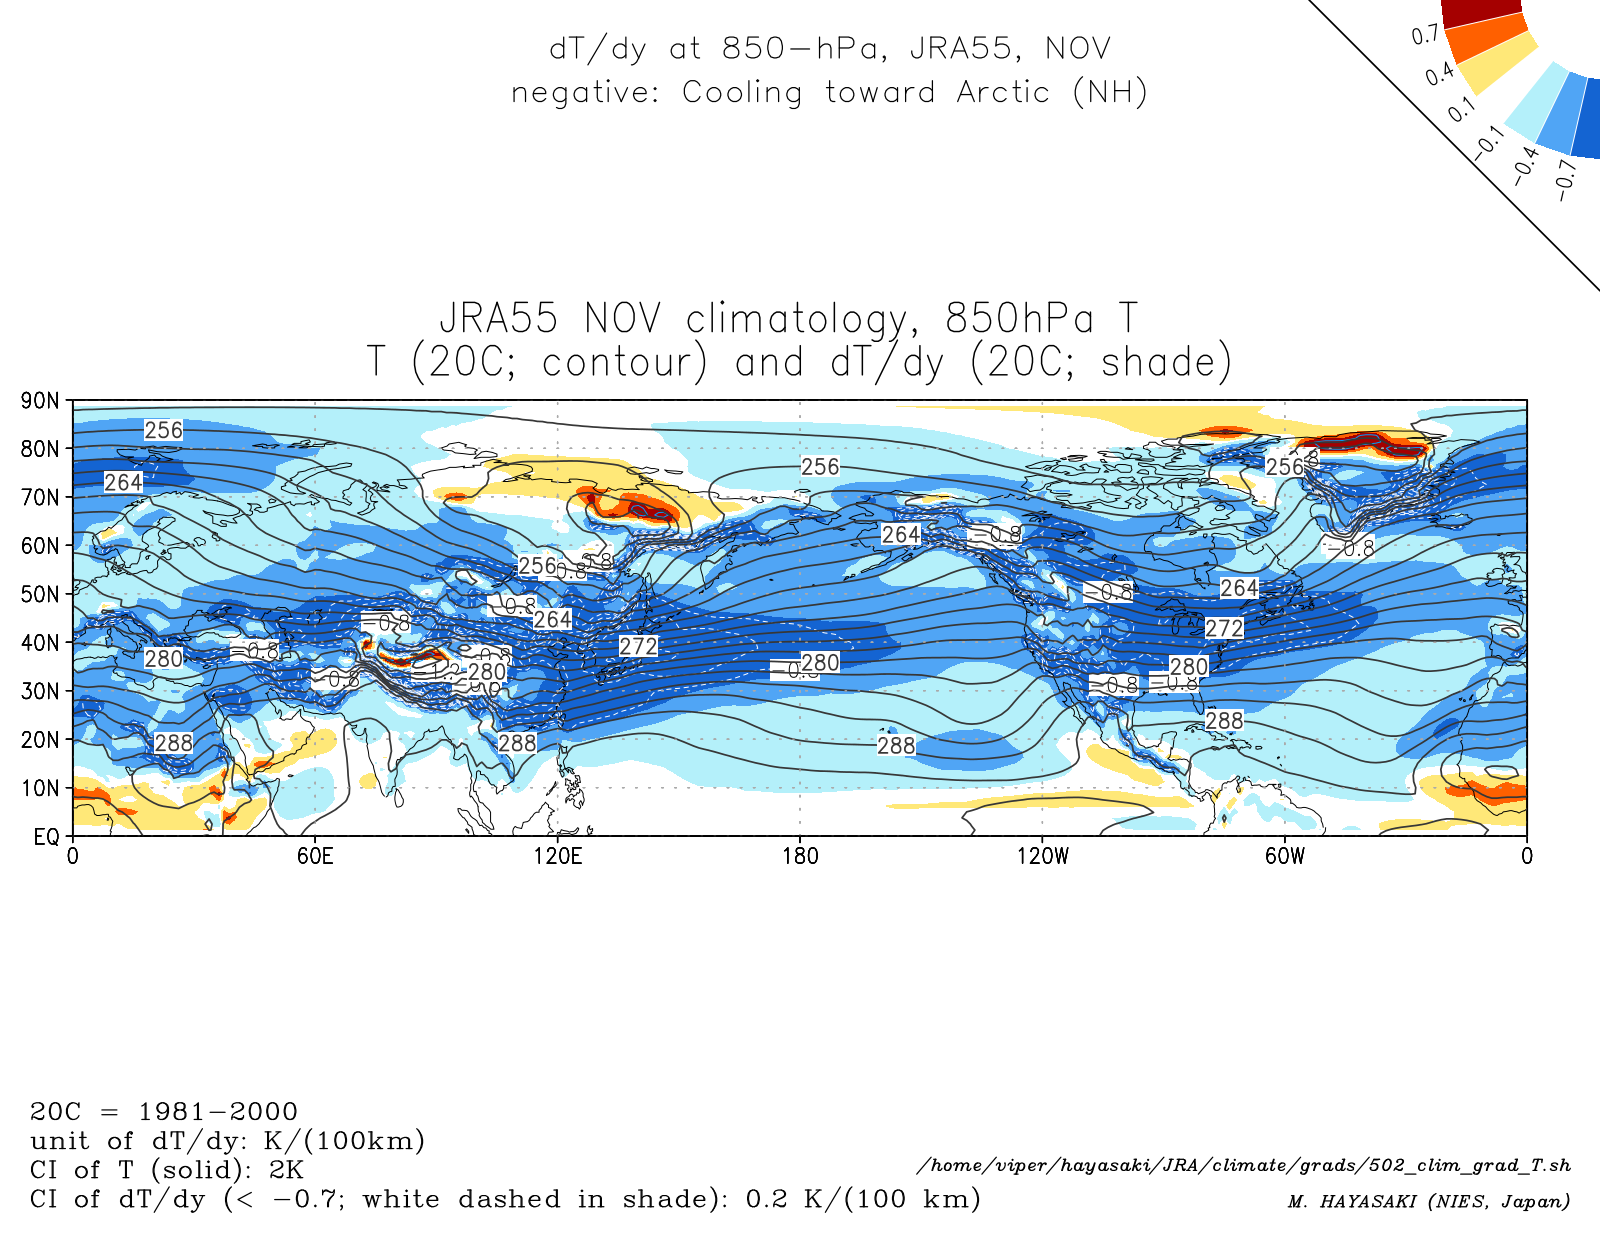 Monthly climatology (November) of dT/dy at 850-hPa in the NH